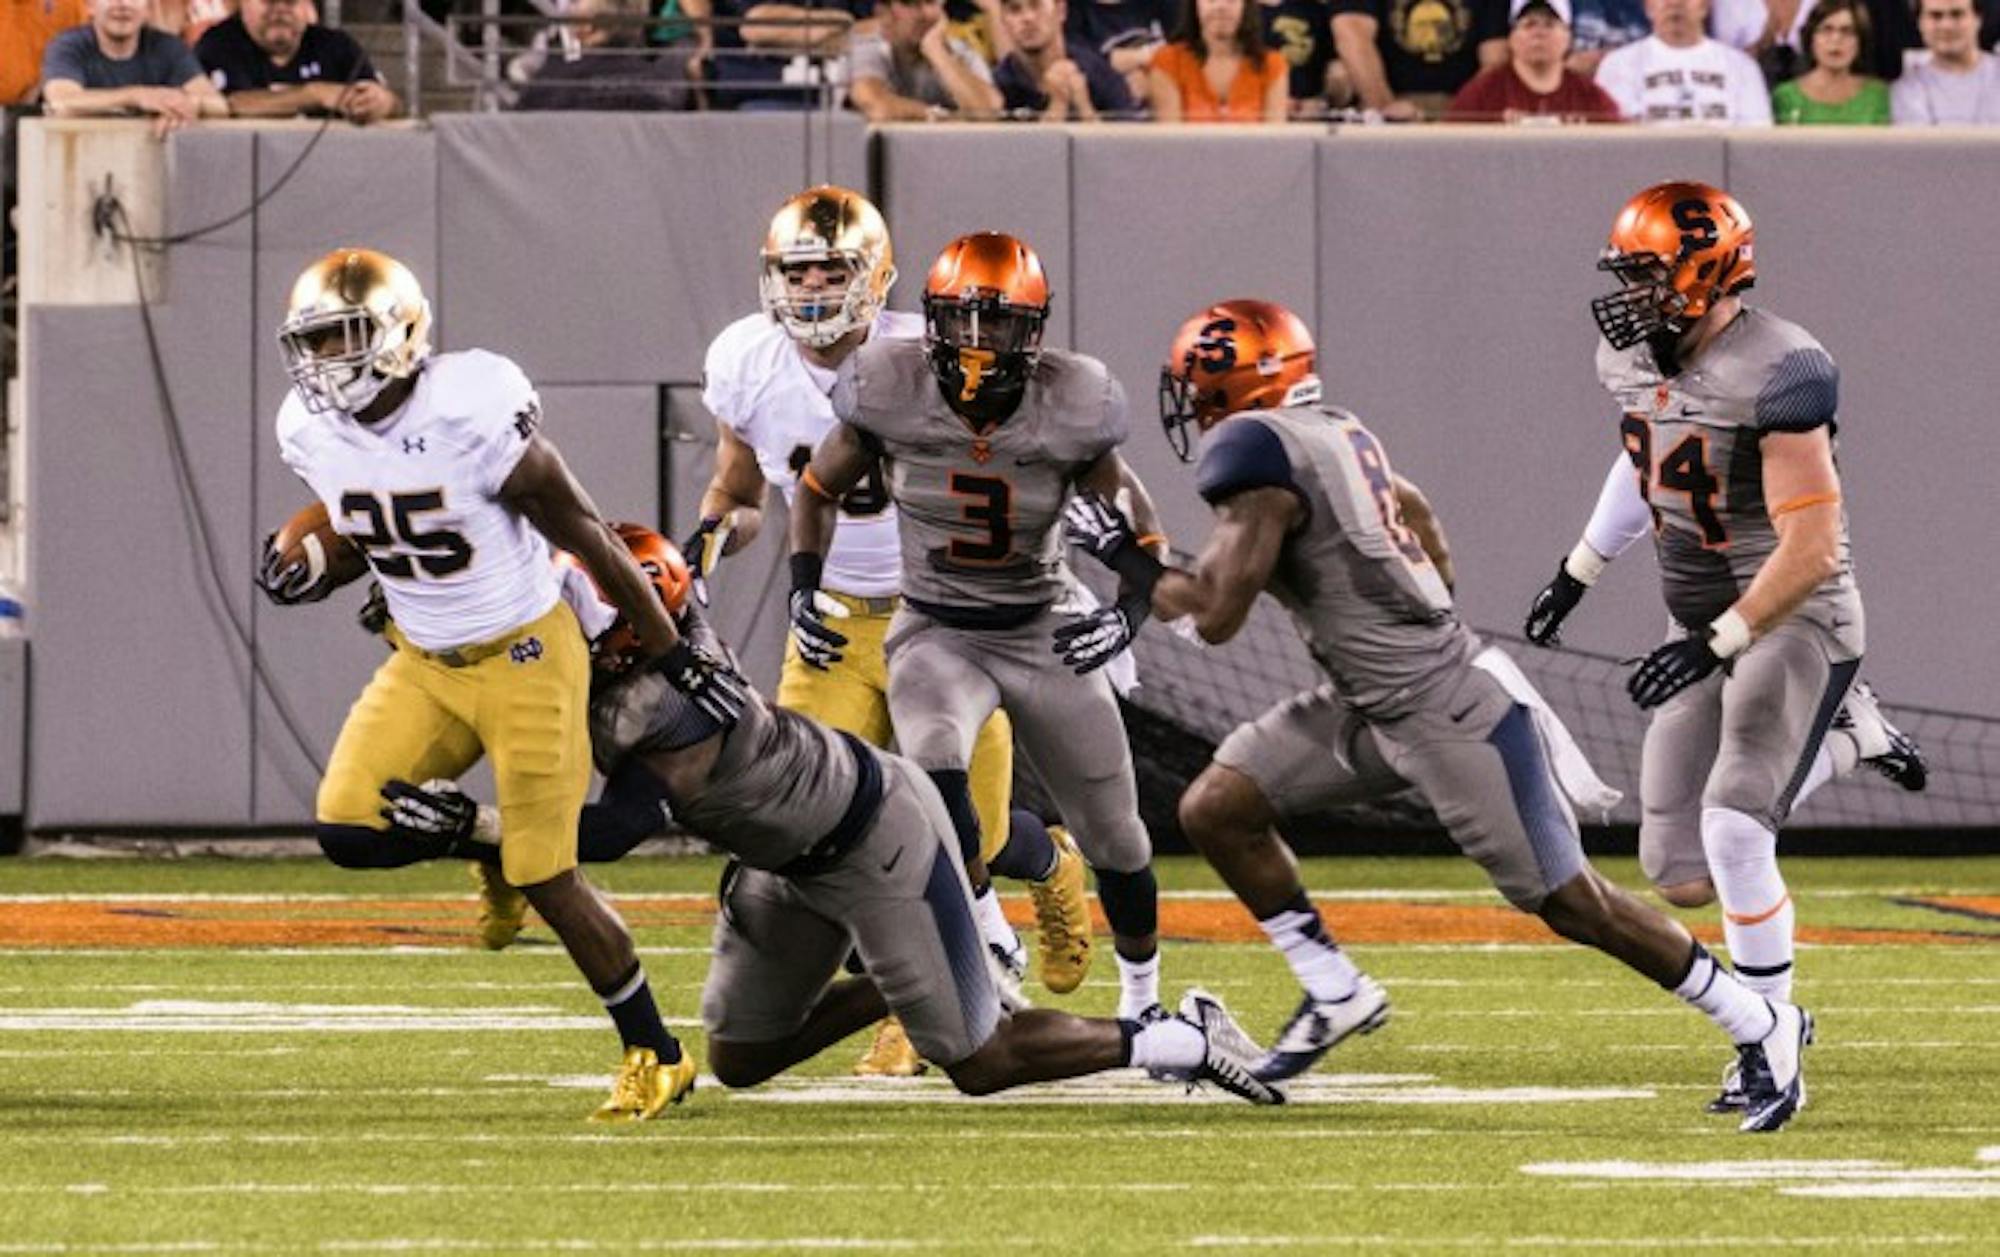 Senior running back Tarean Folston, then a sophomore, attempts to evade a tackler during Notre Dame’s 31-15 victory over Syracuse at the Carrier Dome on Sept. 27, 2014.